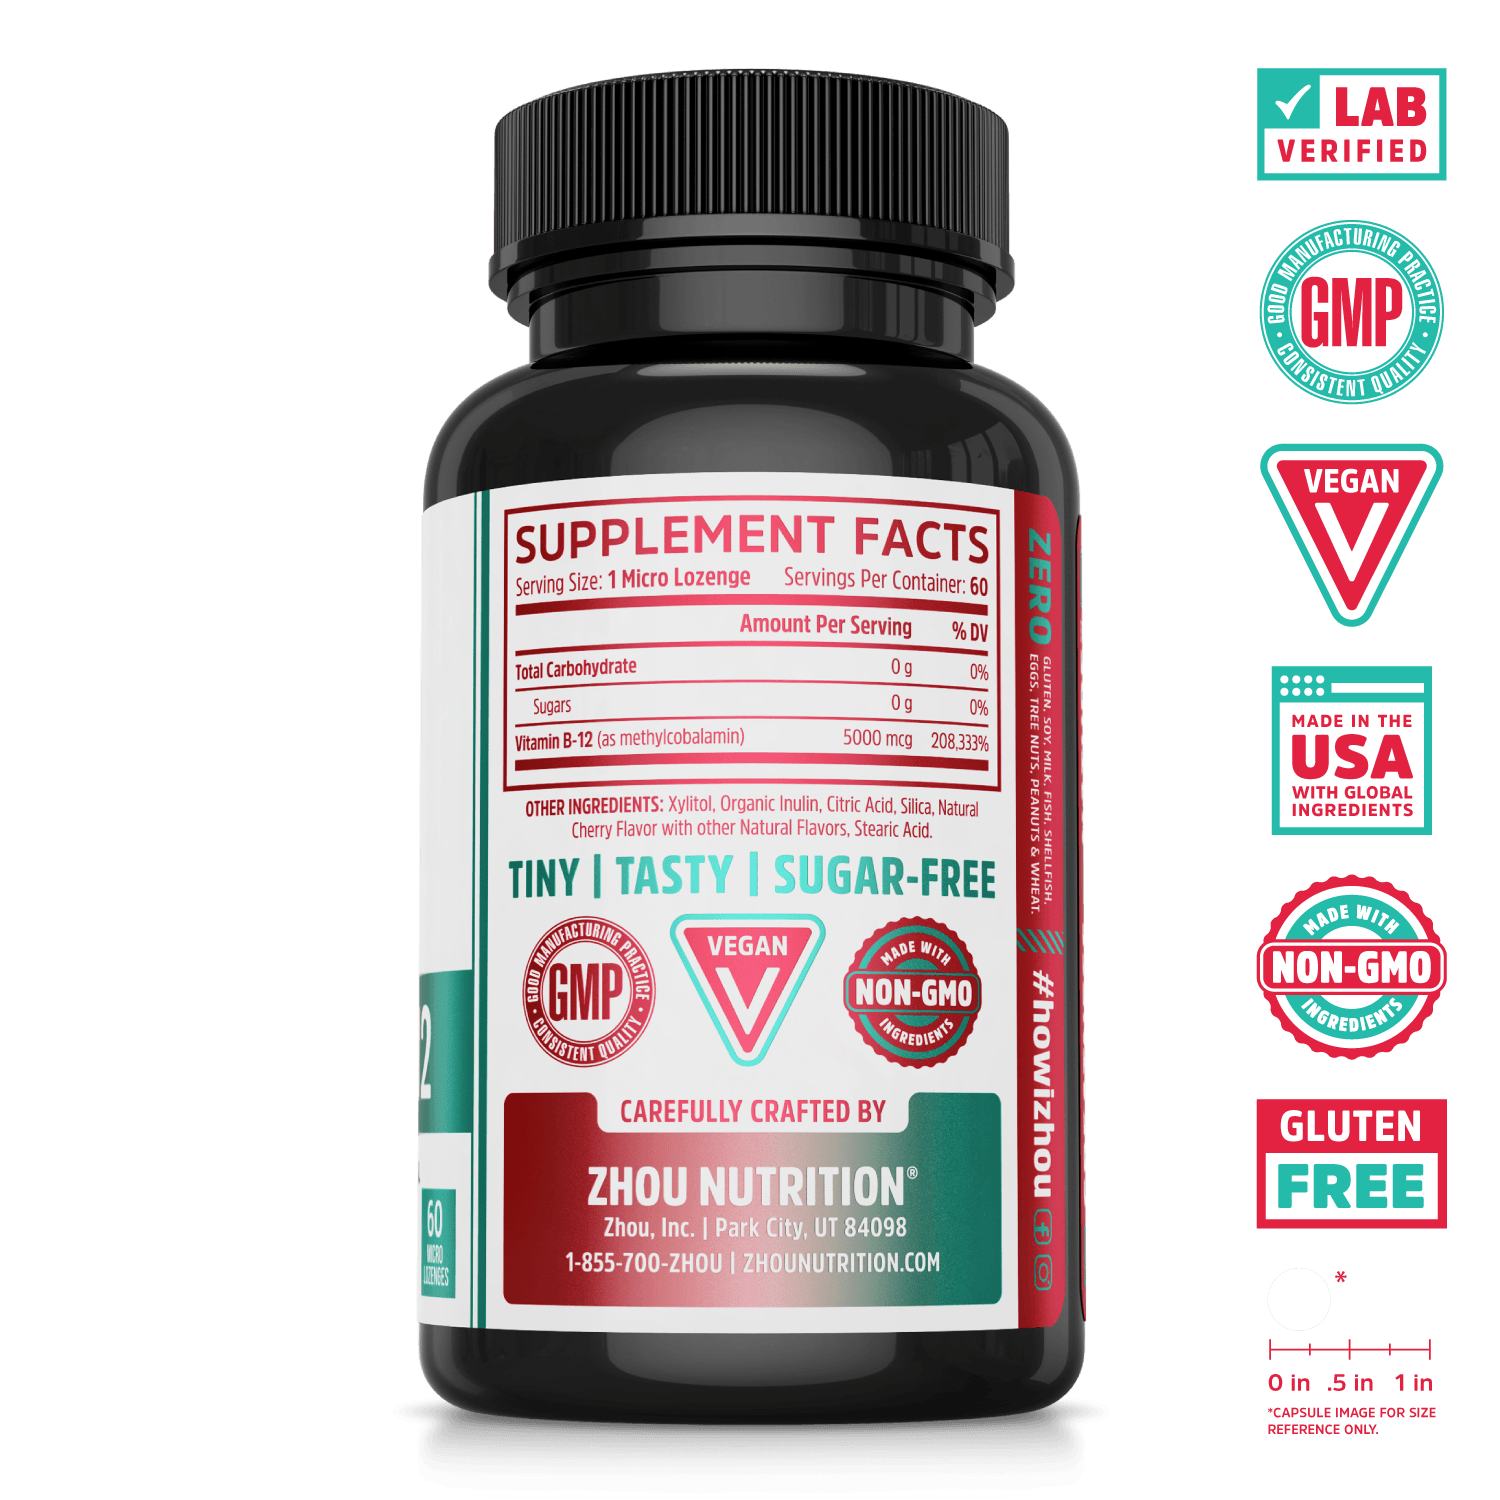 Zhou Nutrition Methyl B-12 sublingual supplement cherry flavor. Lab verified, good manufacturing practices, vegan, made in USA with global ingredients, made with non-GMO ingredients, gluten free.